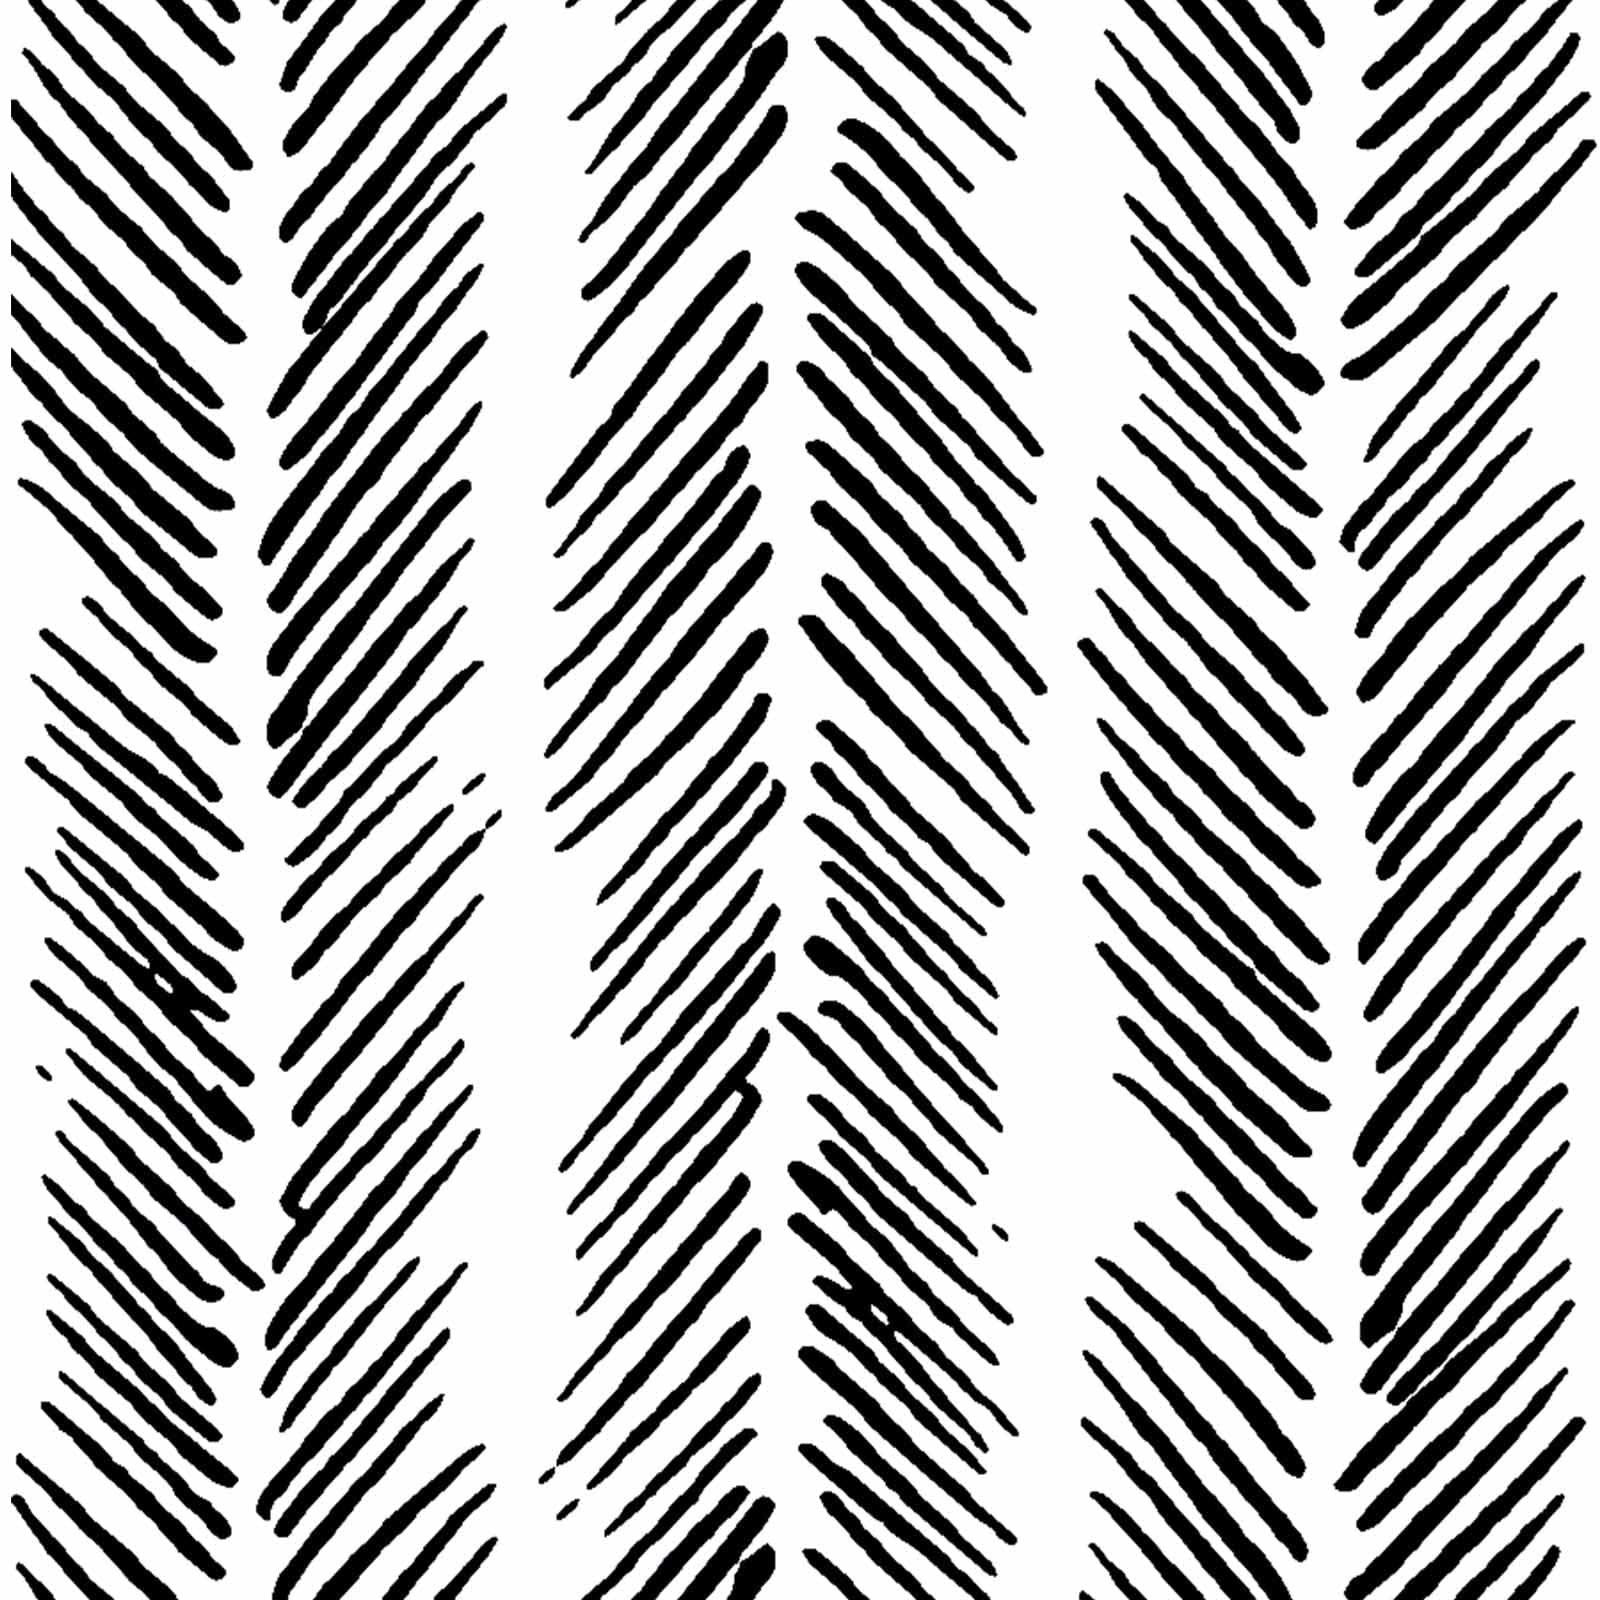 Abyssaly Boho Wallpaper Peel and Stick Wallpaper Black and White 17.71 X 118 Herringbone Removable Modern Stripe Wallpaper Halloween Decorations Wallpaper for Bedroom Laundry Room, Home & Kitchen